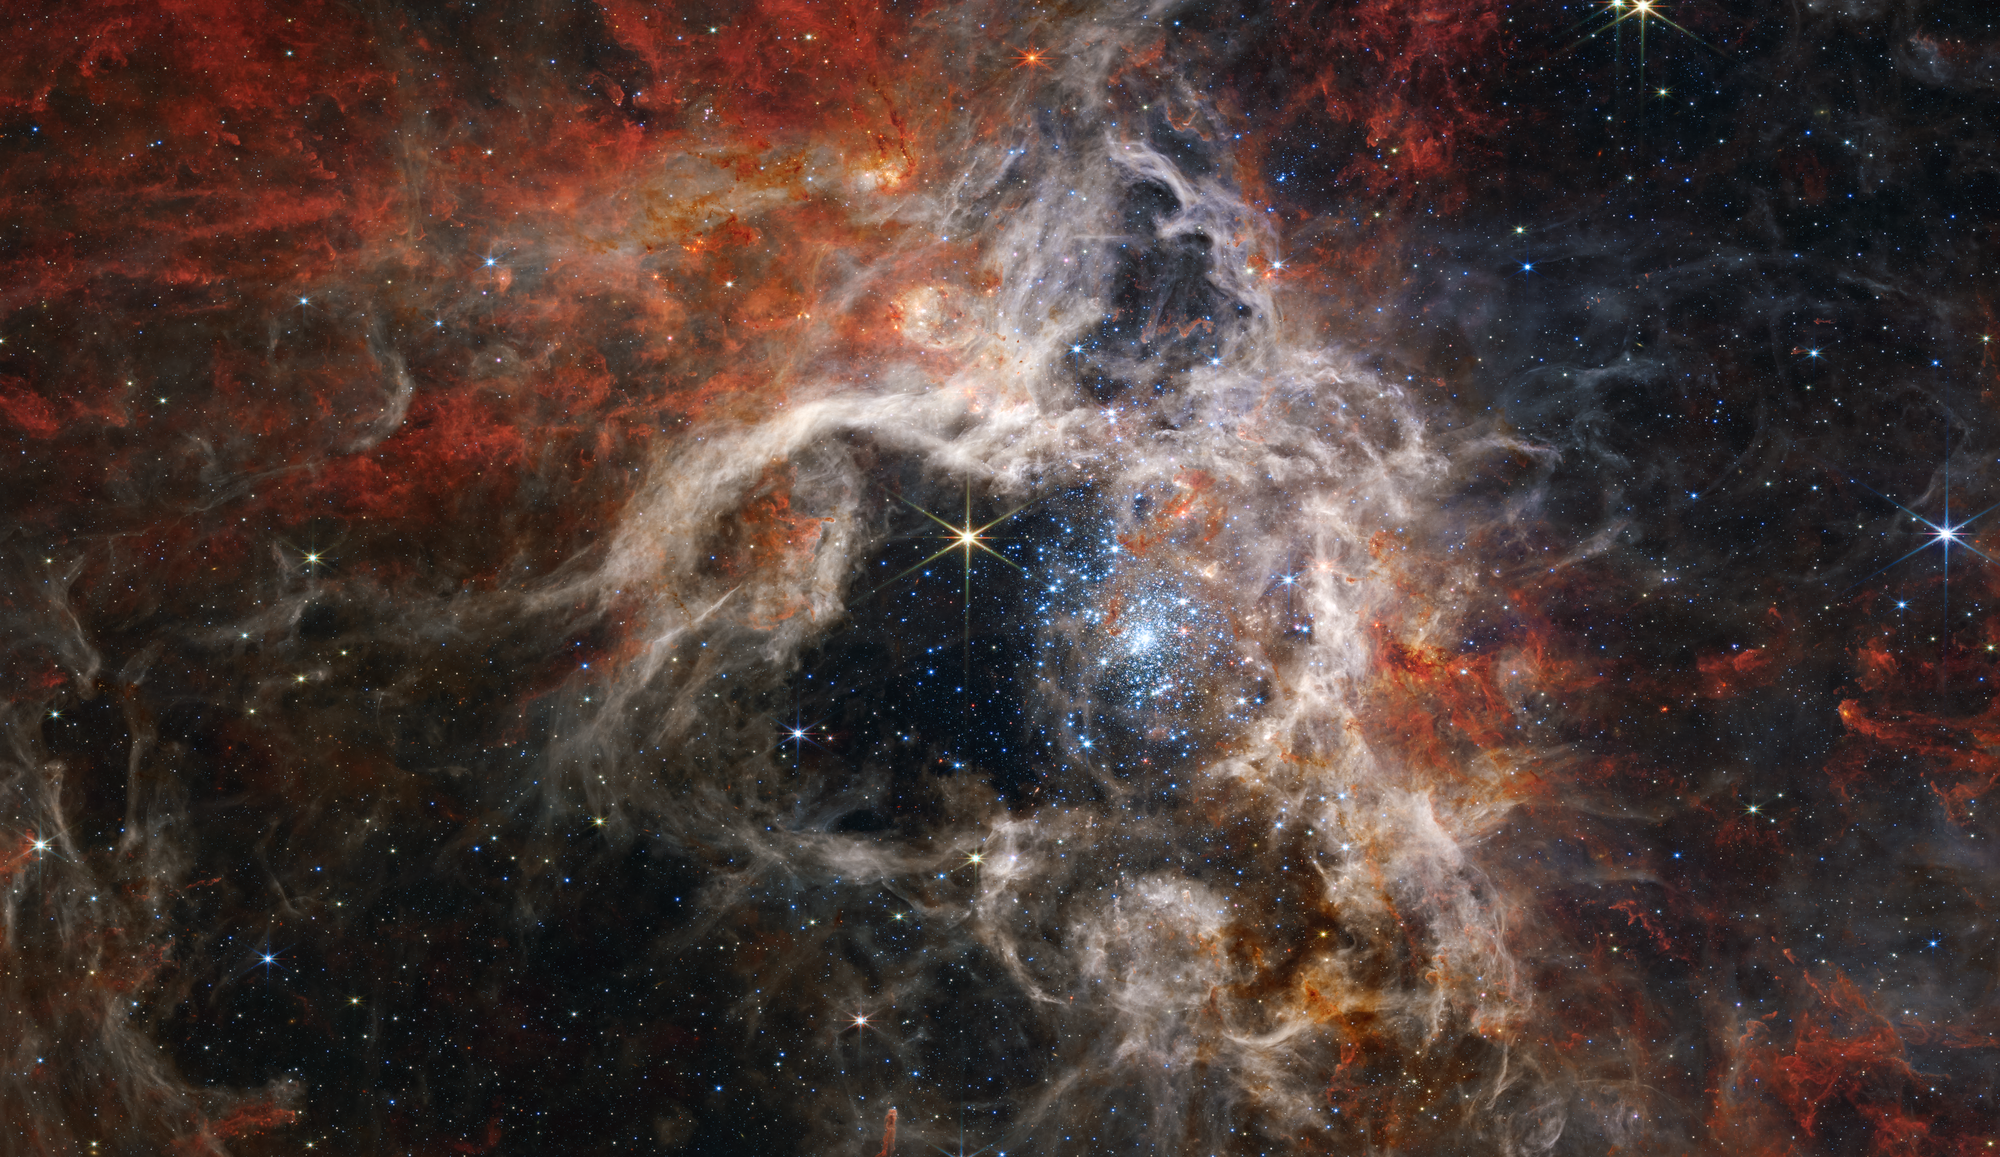 In this mosaic image stretching 340 light-years across, Webb’s Near-Infrared Camera (NIRCam) displays the Tarantula Nebula star-forming region in a new light, including tens of thousands of never-before-seen young stars that were previously shrouded in cosmic dust. The most active region appears to sparkle with massive young stars, appearing pale blue. Scattered among them are still-embedded stars, appearing red, yet to emerge from the dusty cocoon of the nebula. NIRCam is able to detect these dust-enshrouded stars thanks to its unprecedented resolution at near-infrared wavelengths. To the upper left of the cluster of young stars, and the top of the nebula’s cavity, an older star prominently displays NIRCam’s distinctive eight diffraction spikes, an artifact of the telescope’s structure. Following the top central spike of this star upward, it almost points to a distinctive bubble in the cloud. Young stars still surrounded by dusty material are blowing this bubble, beginning to carve out their own cavity. Astronomers used two of Webb’s spectrographs to take a closer look at this region and determine the chemical makeup of the star and its surrounding gas. This spectral information will tell astronomers about the age of the nebula and how many generations of star birth it has seen. Image: NASA, ESA, CSA, STScI, Webb ERO Production Team